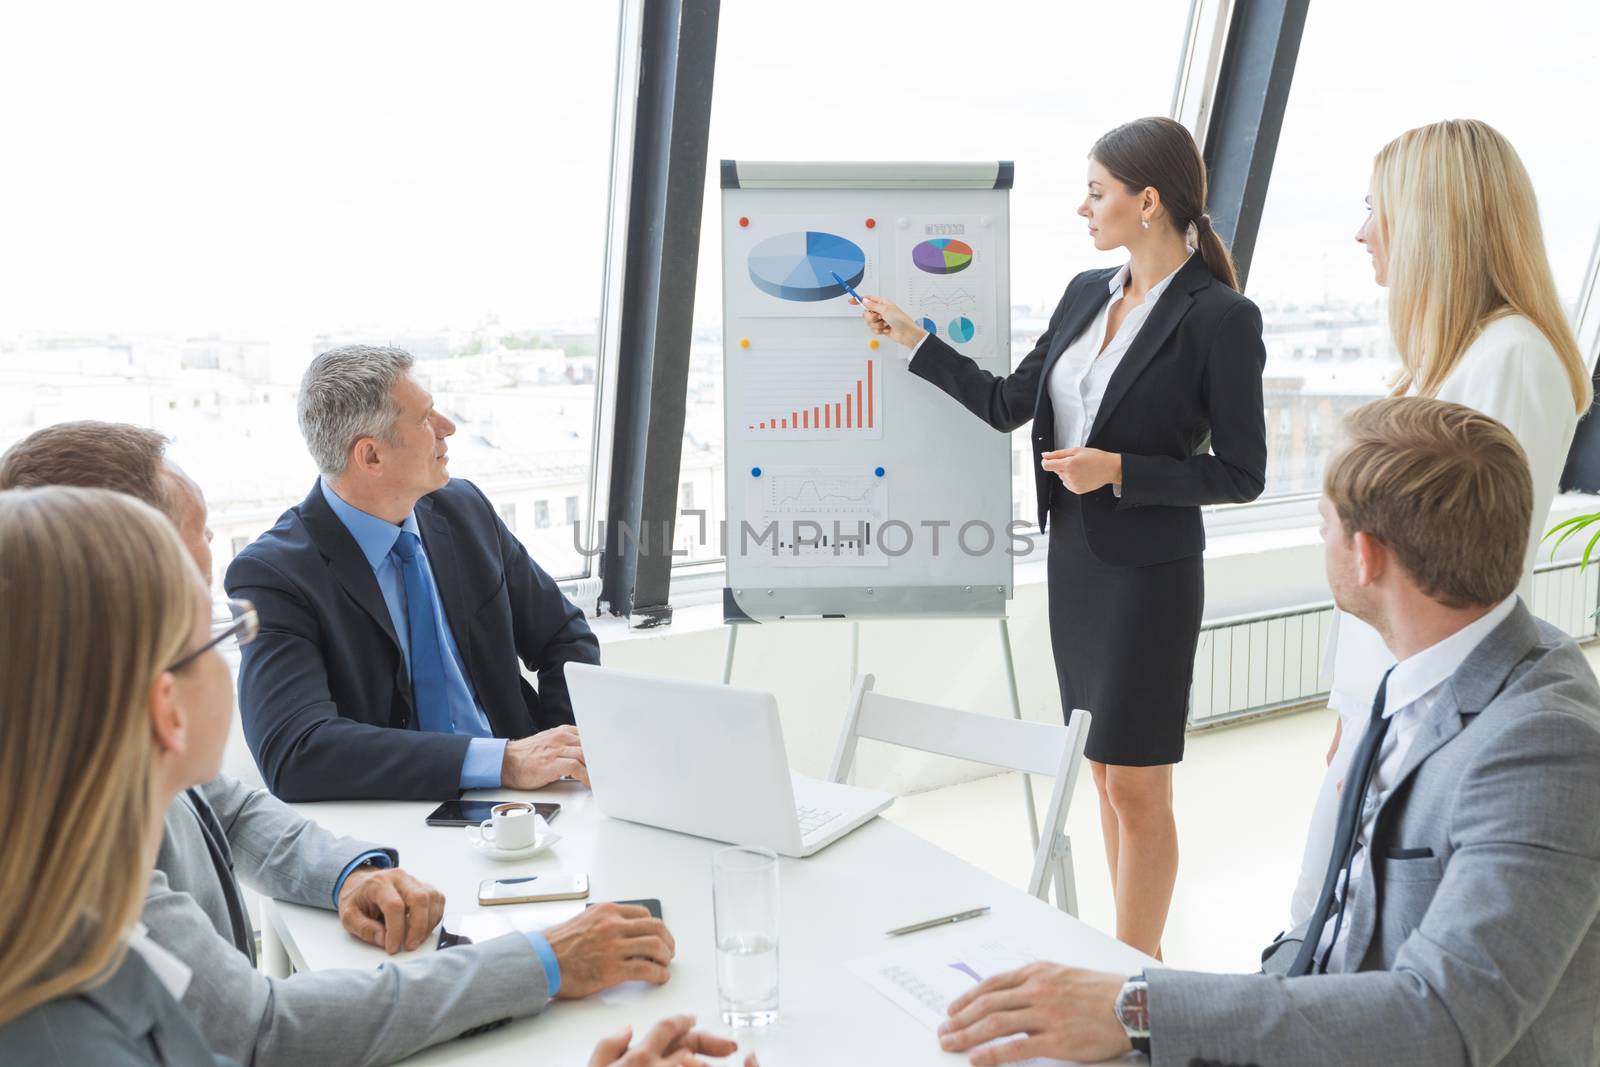 Businesswoman pointing at a chart on a whiteboard during business meeting